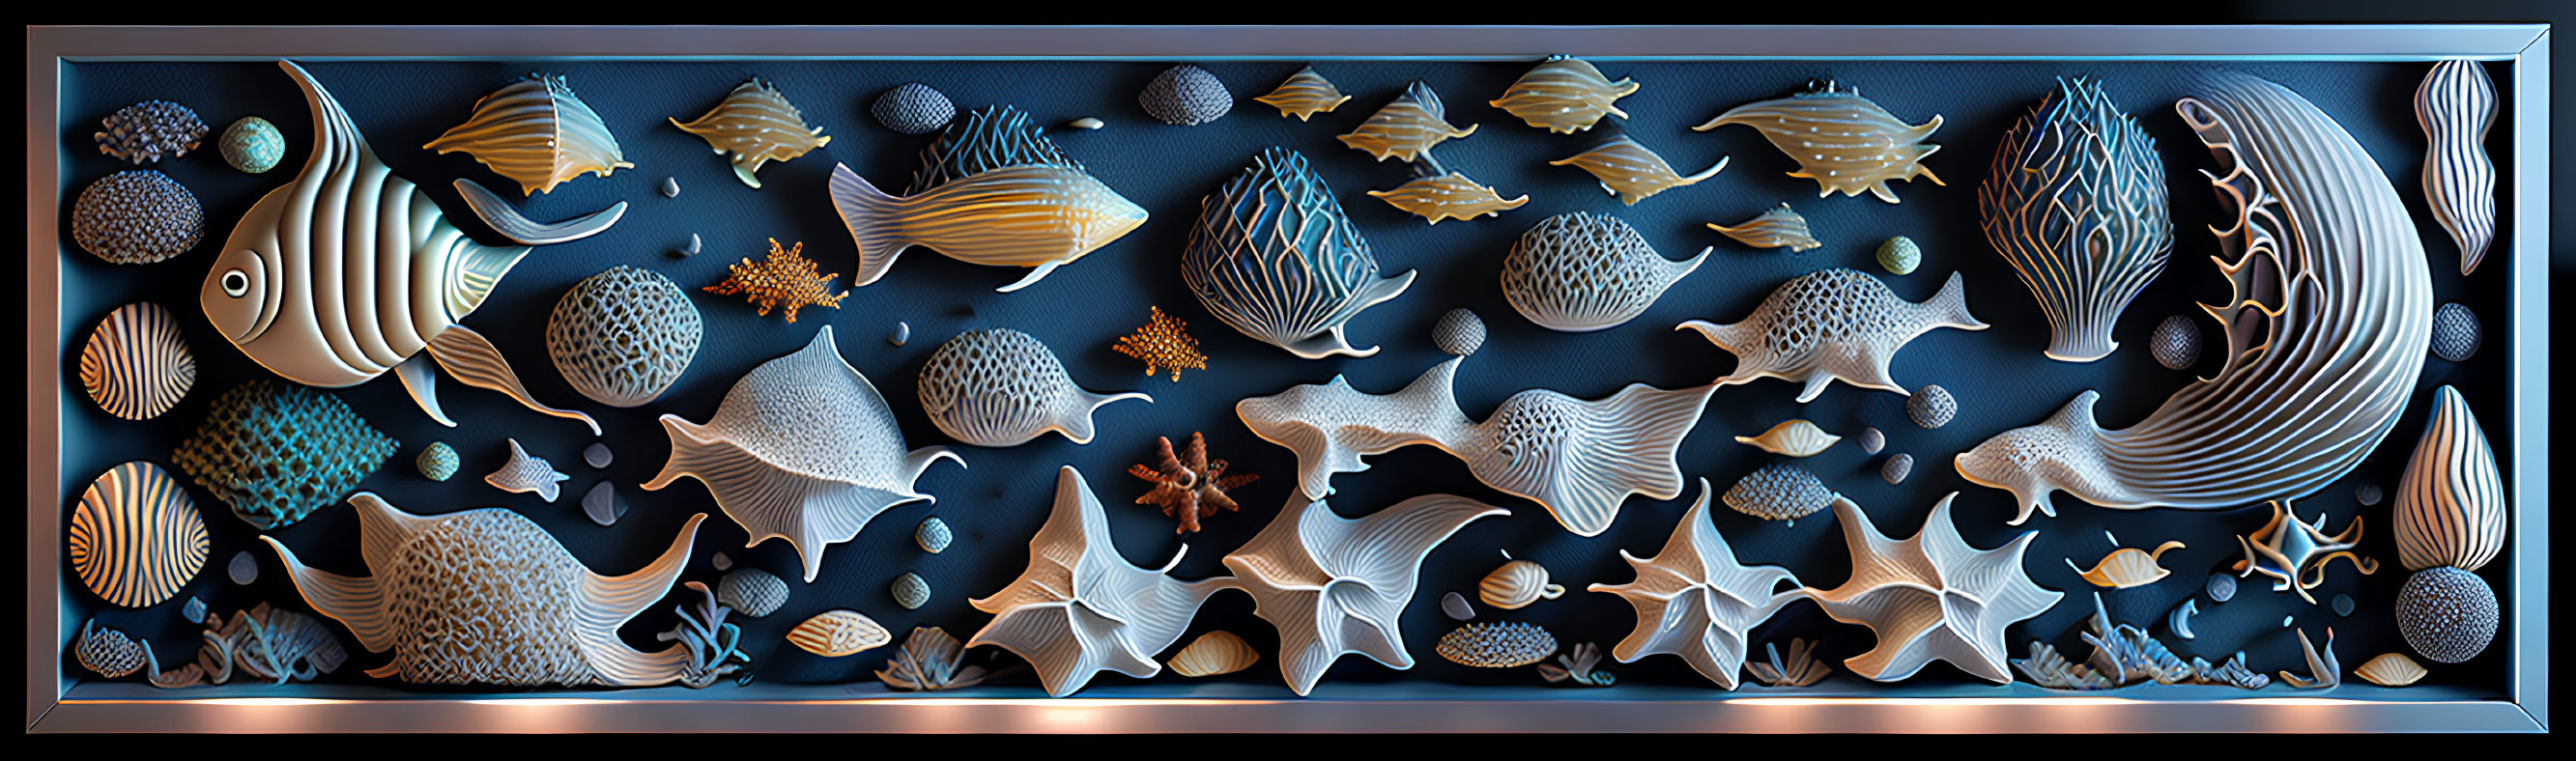 Stylized 3D artwork of sea creatures and shells in gold, blue, and cream on